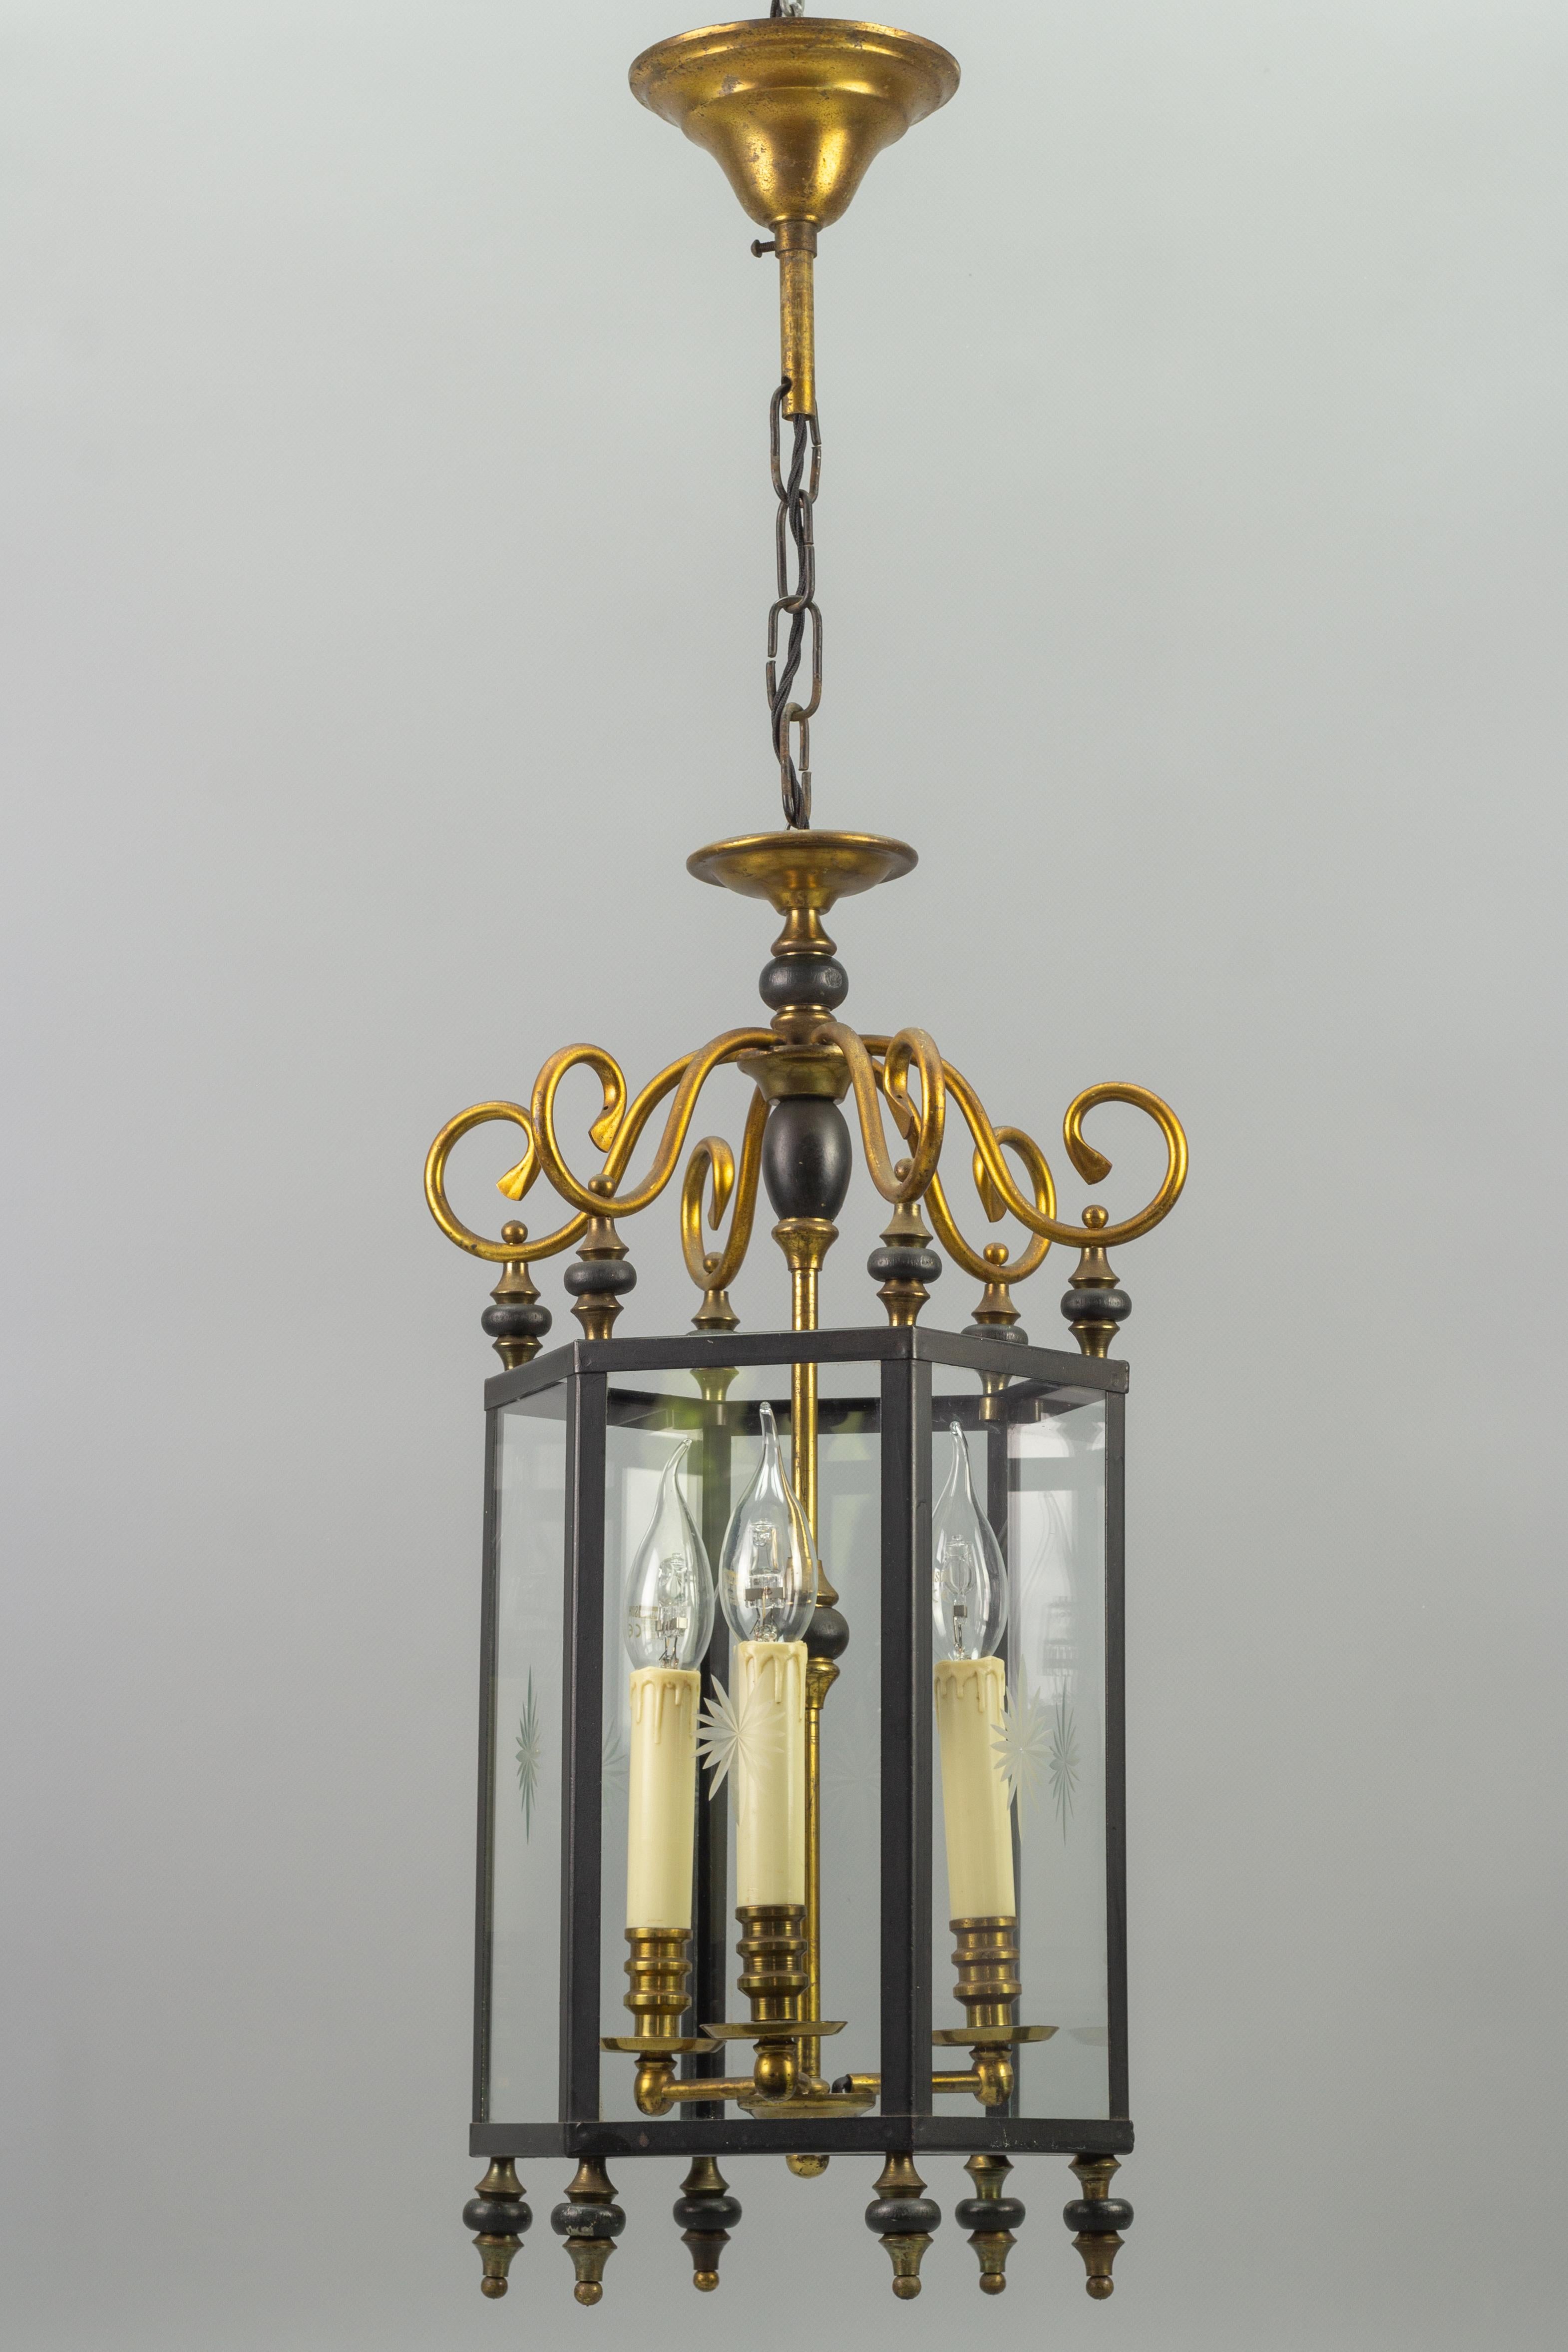 Beautiful French mid-20th century neoclassical style three-light interior hanging lantern with six glass panels. Each of the six glass panels has a cut starburst decor.
Tree sockets for E14 size light bulbs.
Dimensions: height: 83 cm / 32.67 in;